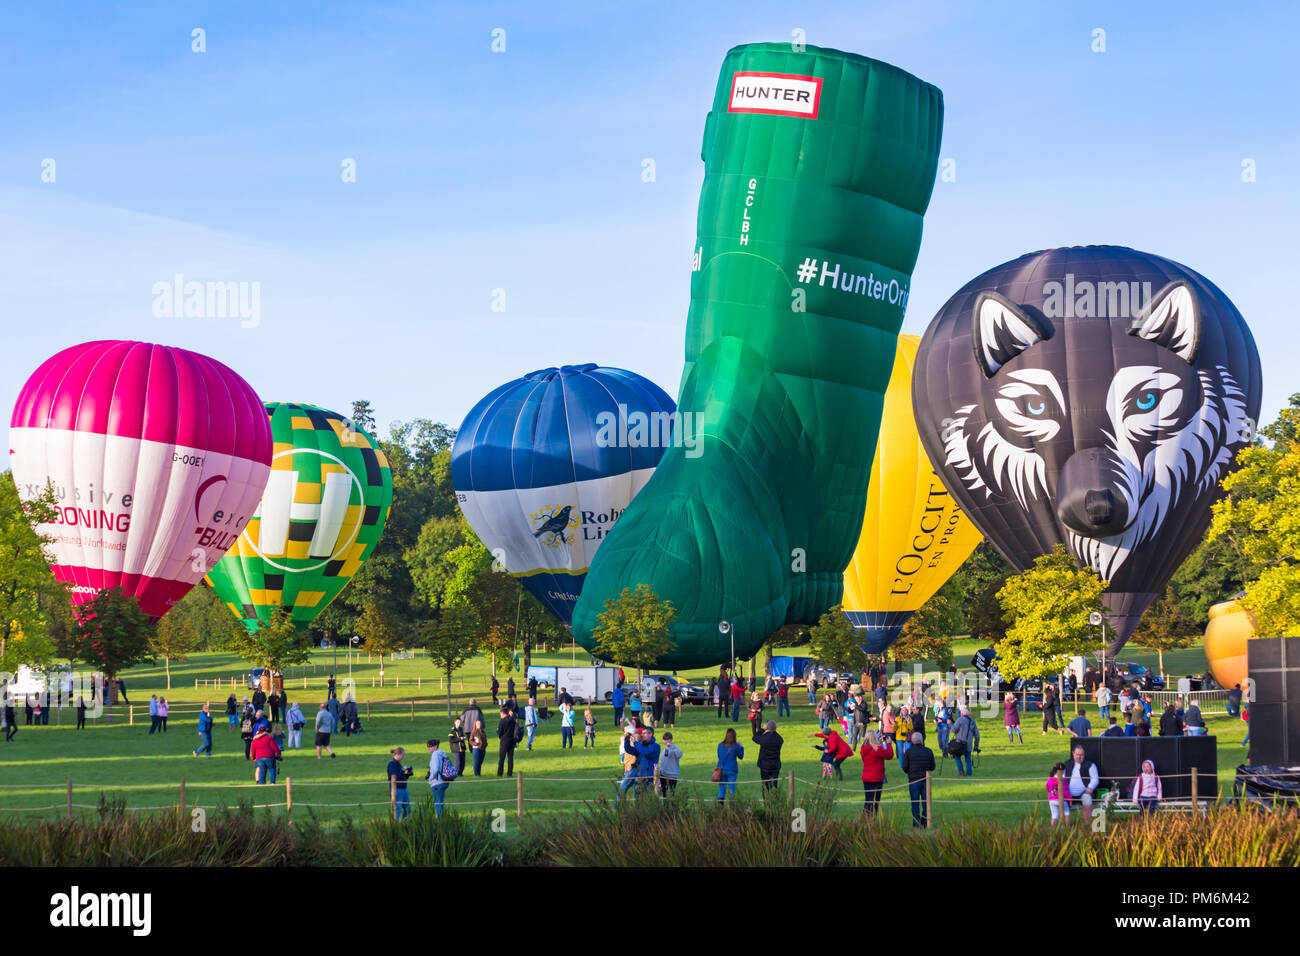 hot air balloons preparing for the morning mass ascent at Longleat Sky Safari, Wiltshire, UK in September Stock Photo